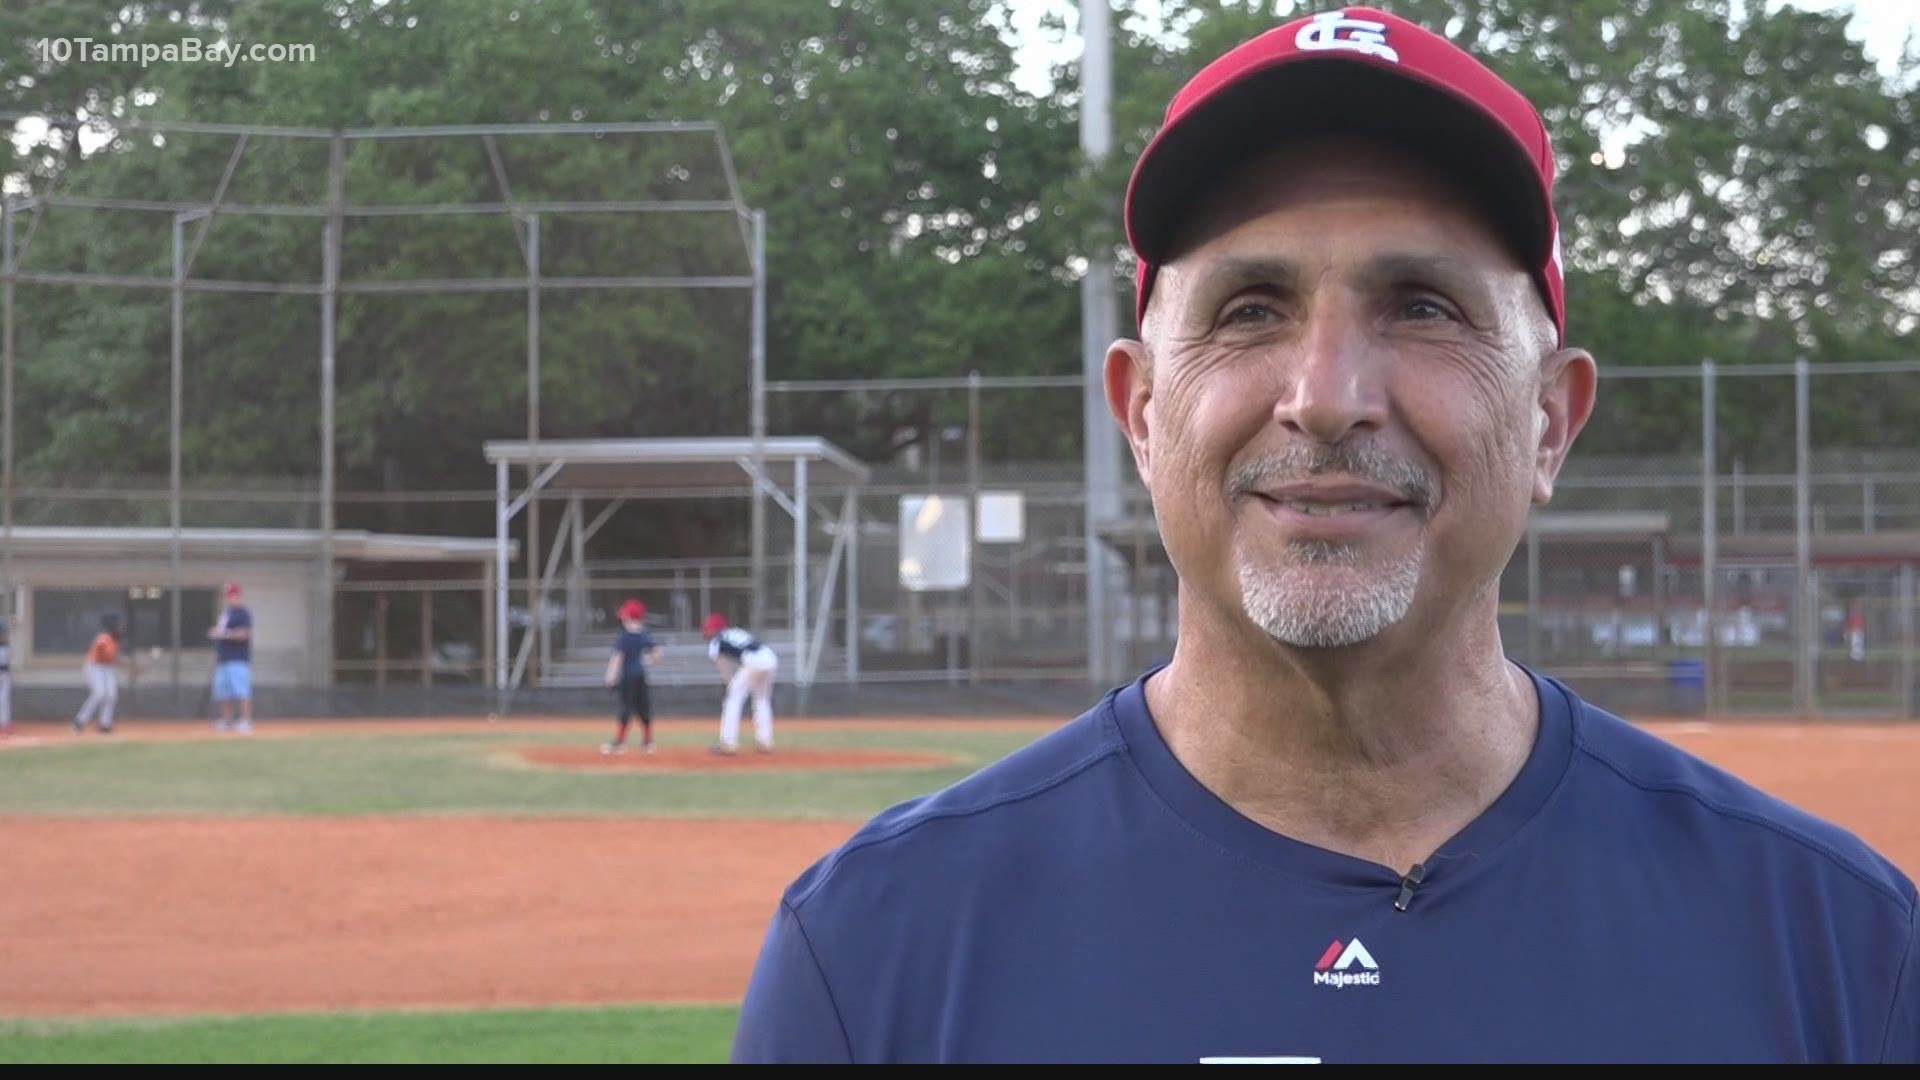 Volunteer baseball coach reflects on more than 30 years of